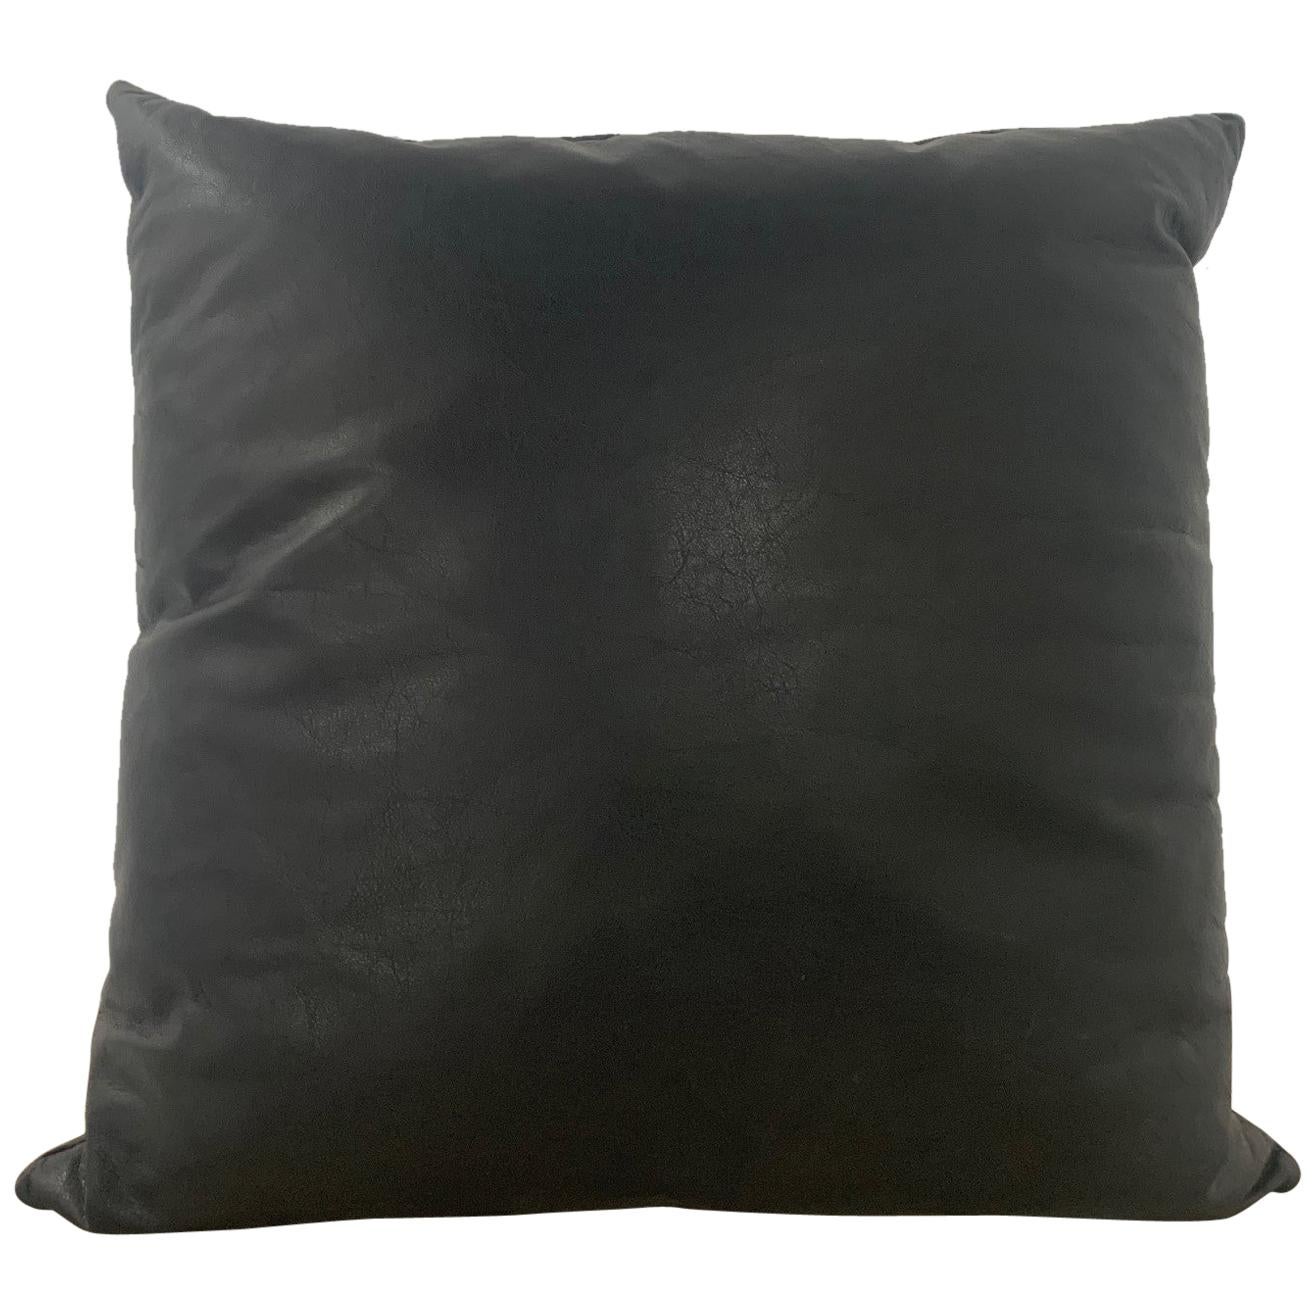 Seven Black Leather Down Pillows by Joe D'Urso for Knoll International For Sale